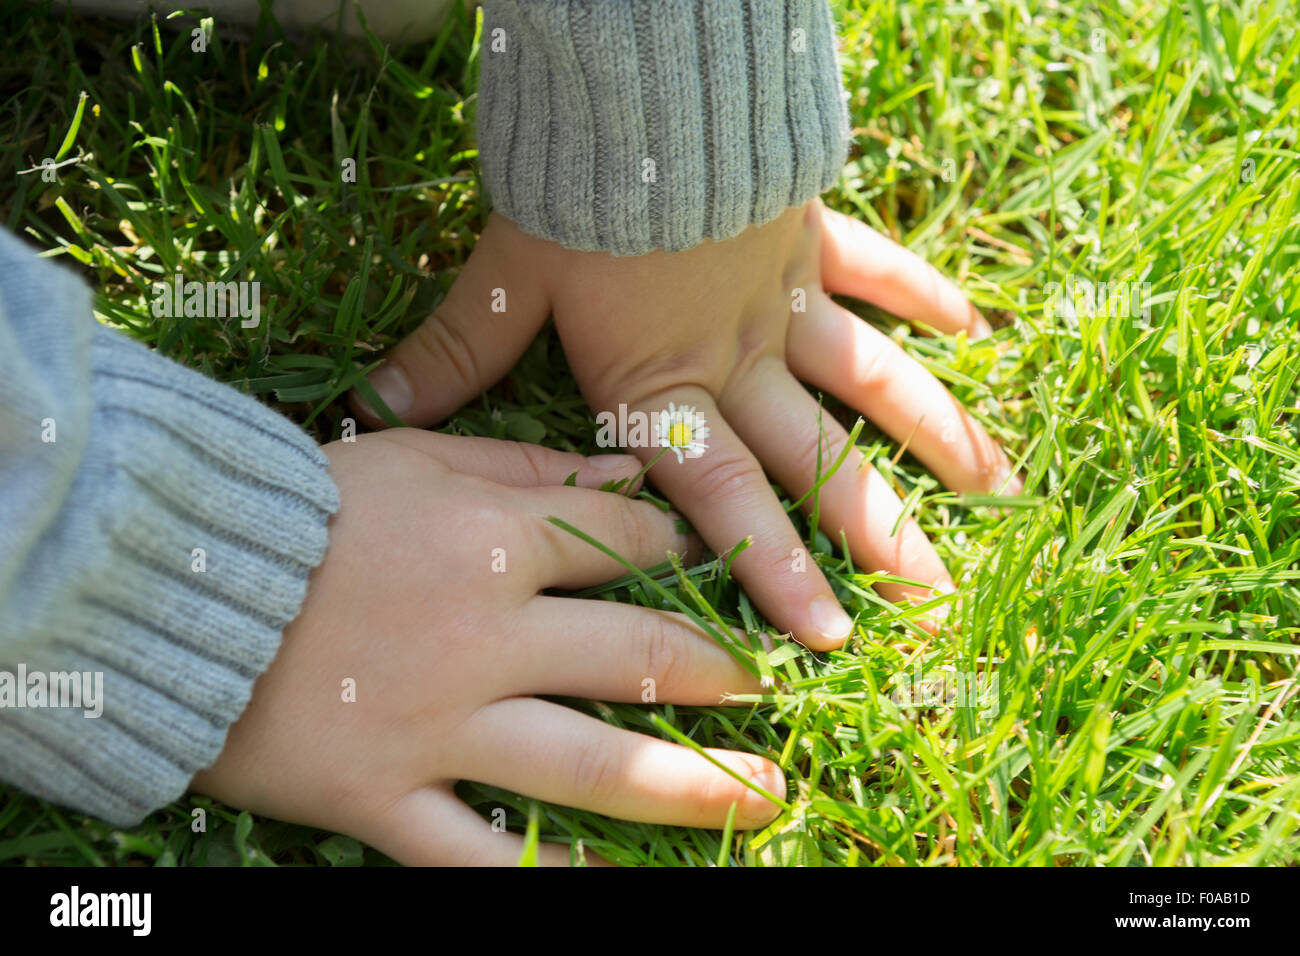 Close Up Of A Woman's Hand Touching The Saturated Grass, 'feeling Nature'  Stock Photo, Picture and Royalty Free Image. Image 43047099.